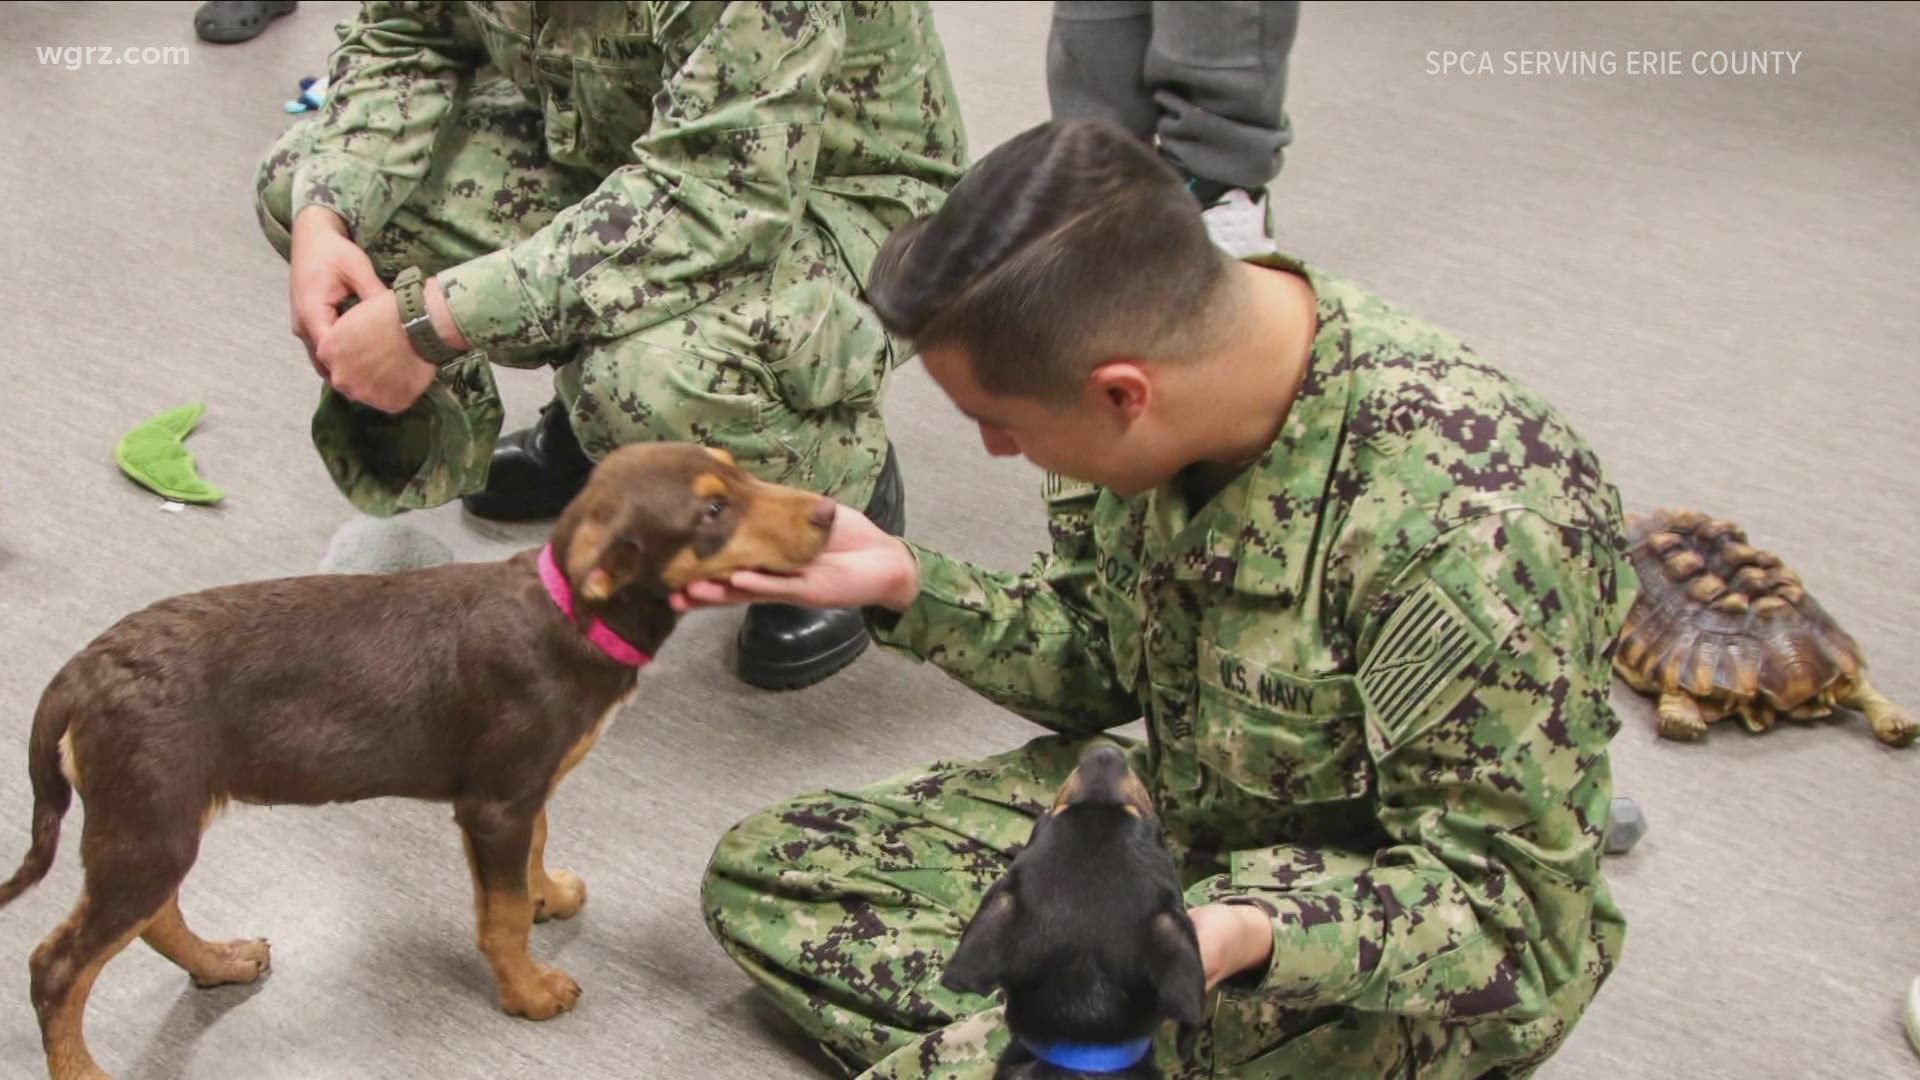 Pets and Vets is based off of research showing the positive impact having a pet can have on people who have served our country.